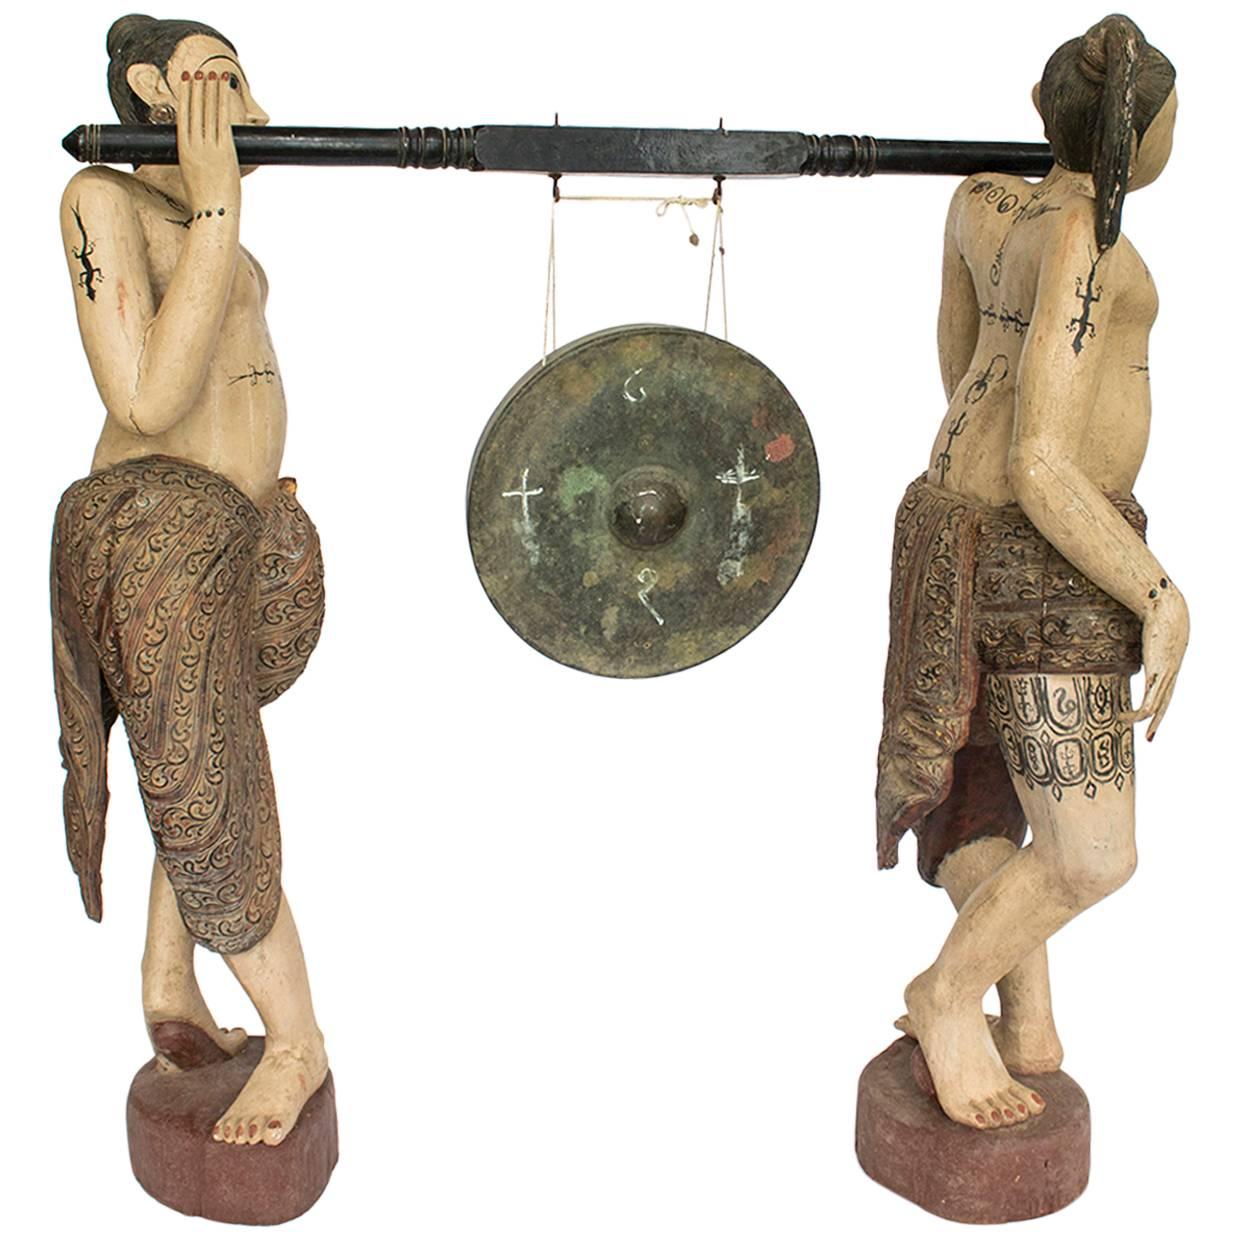 Unusual Burmese Gong Early 20th Century Carved Teak Shan Figurative Statues For Sale